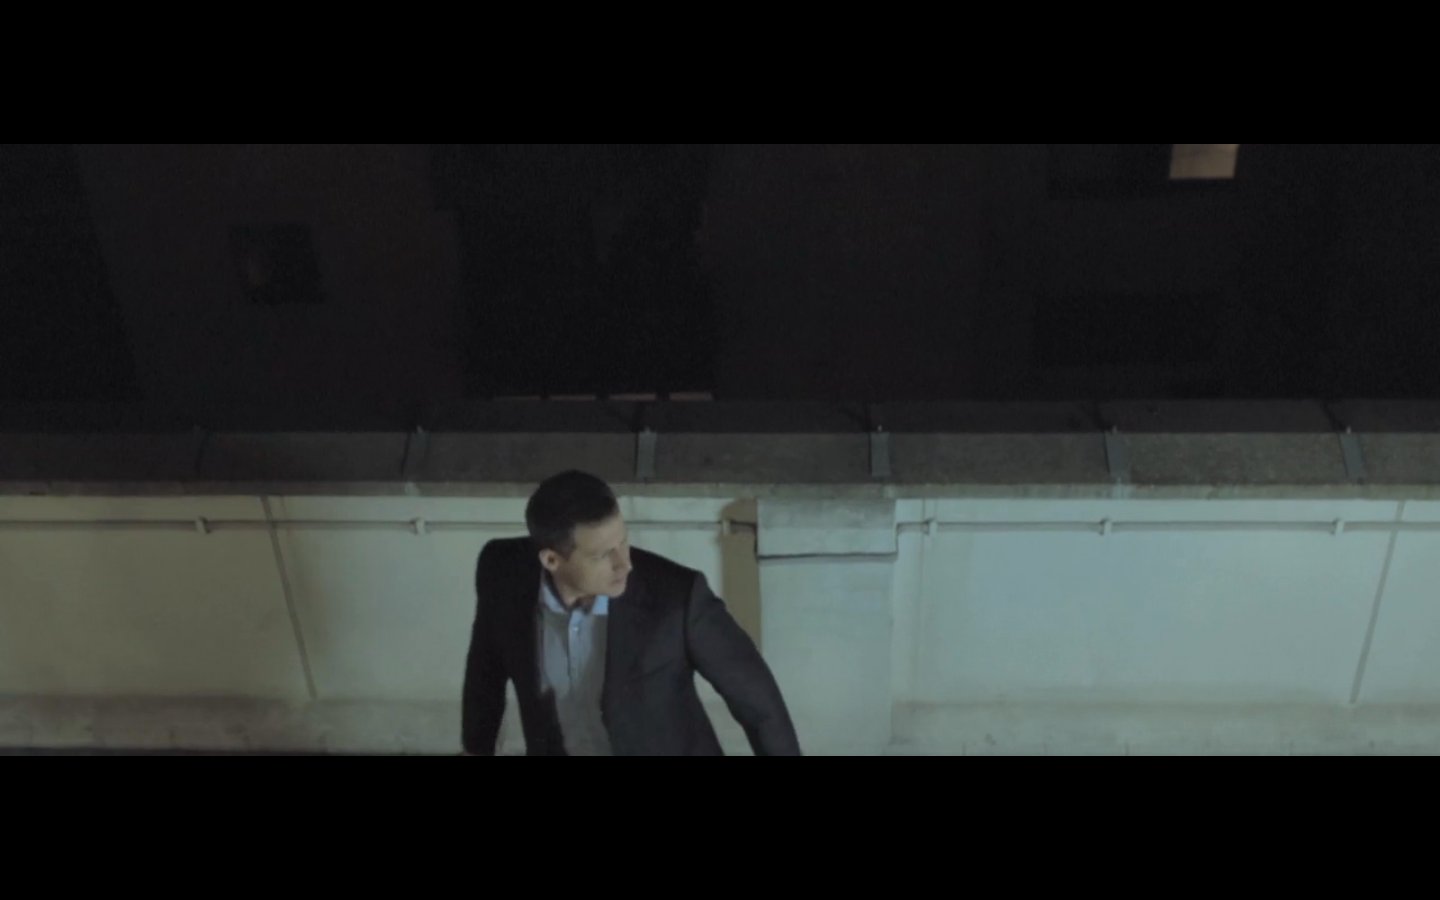 Screen Capture from Mr Fogg 'A Little Letting Go' 2012